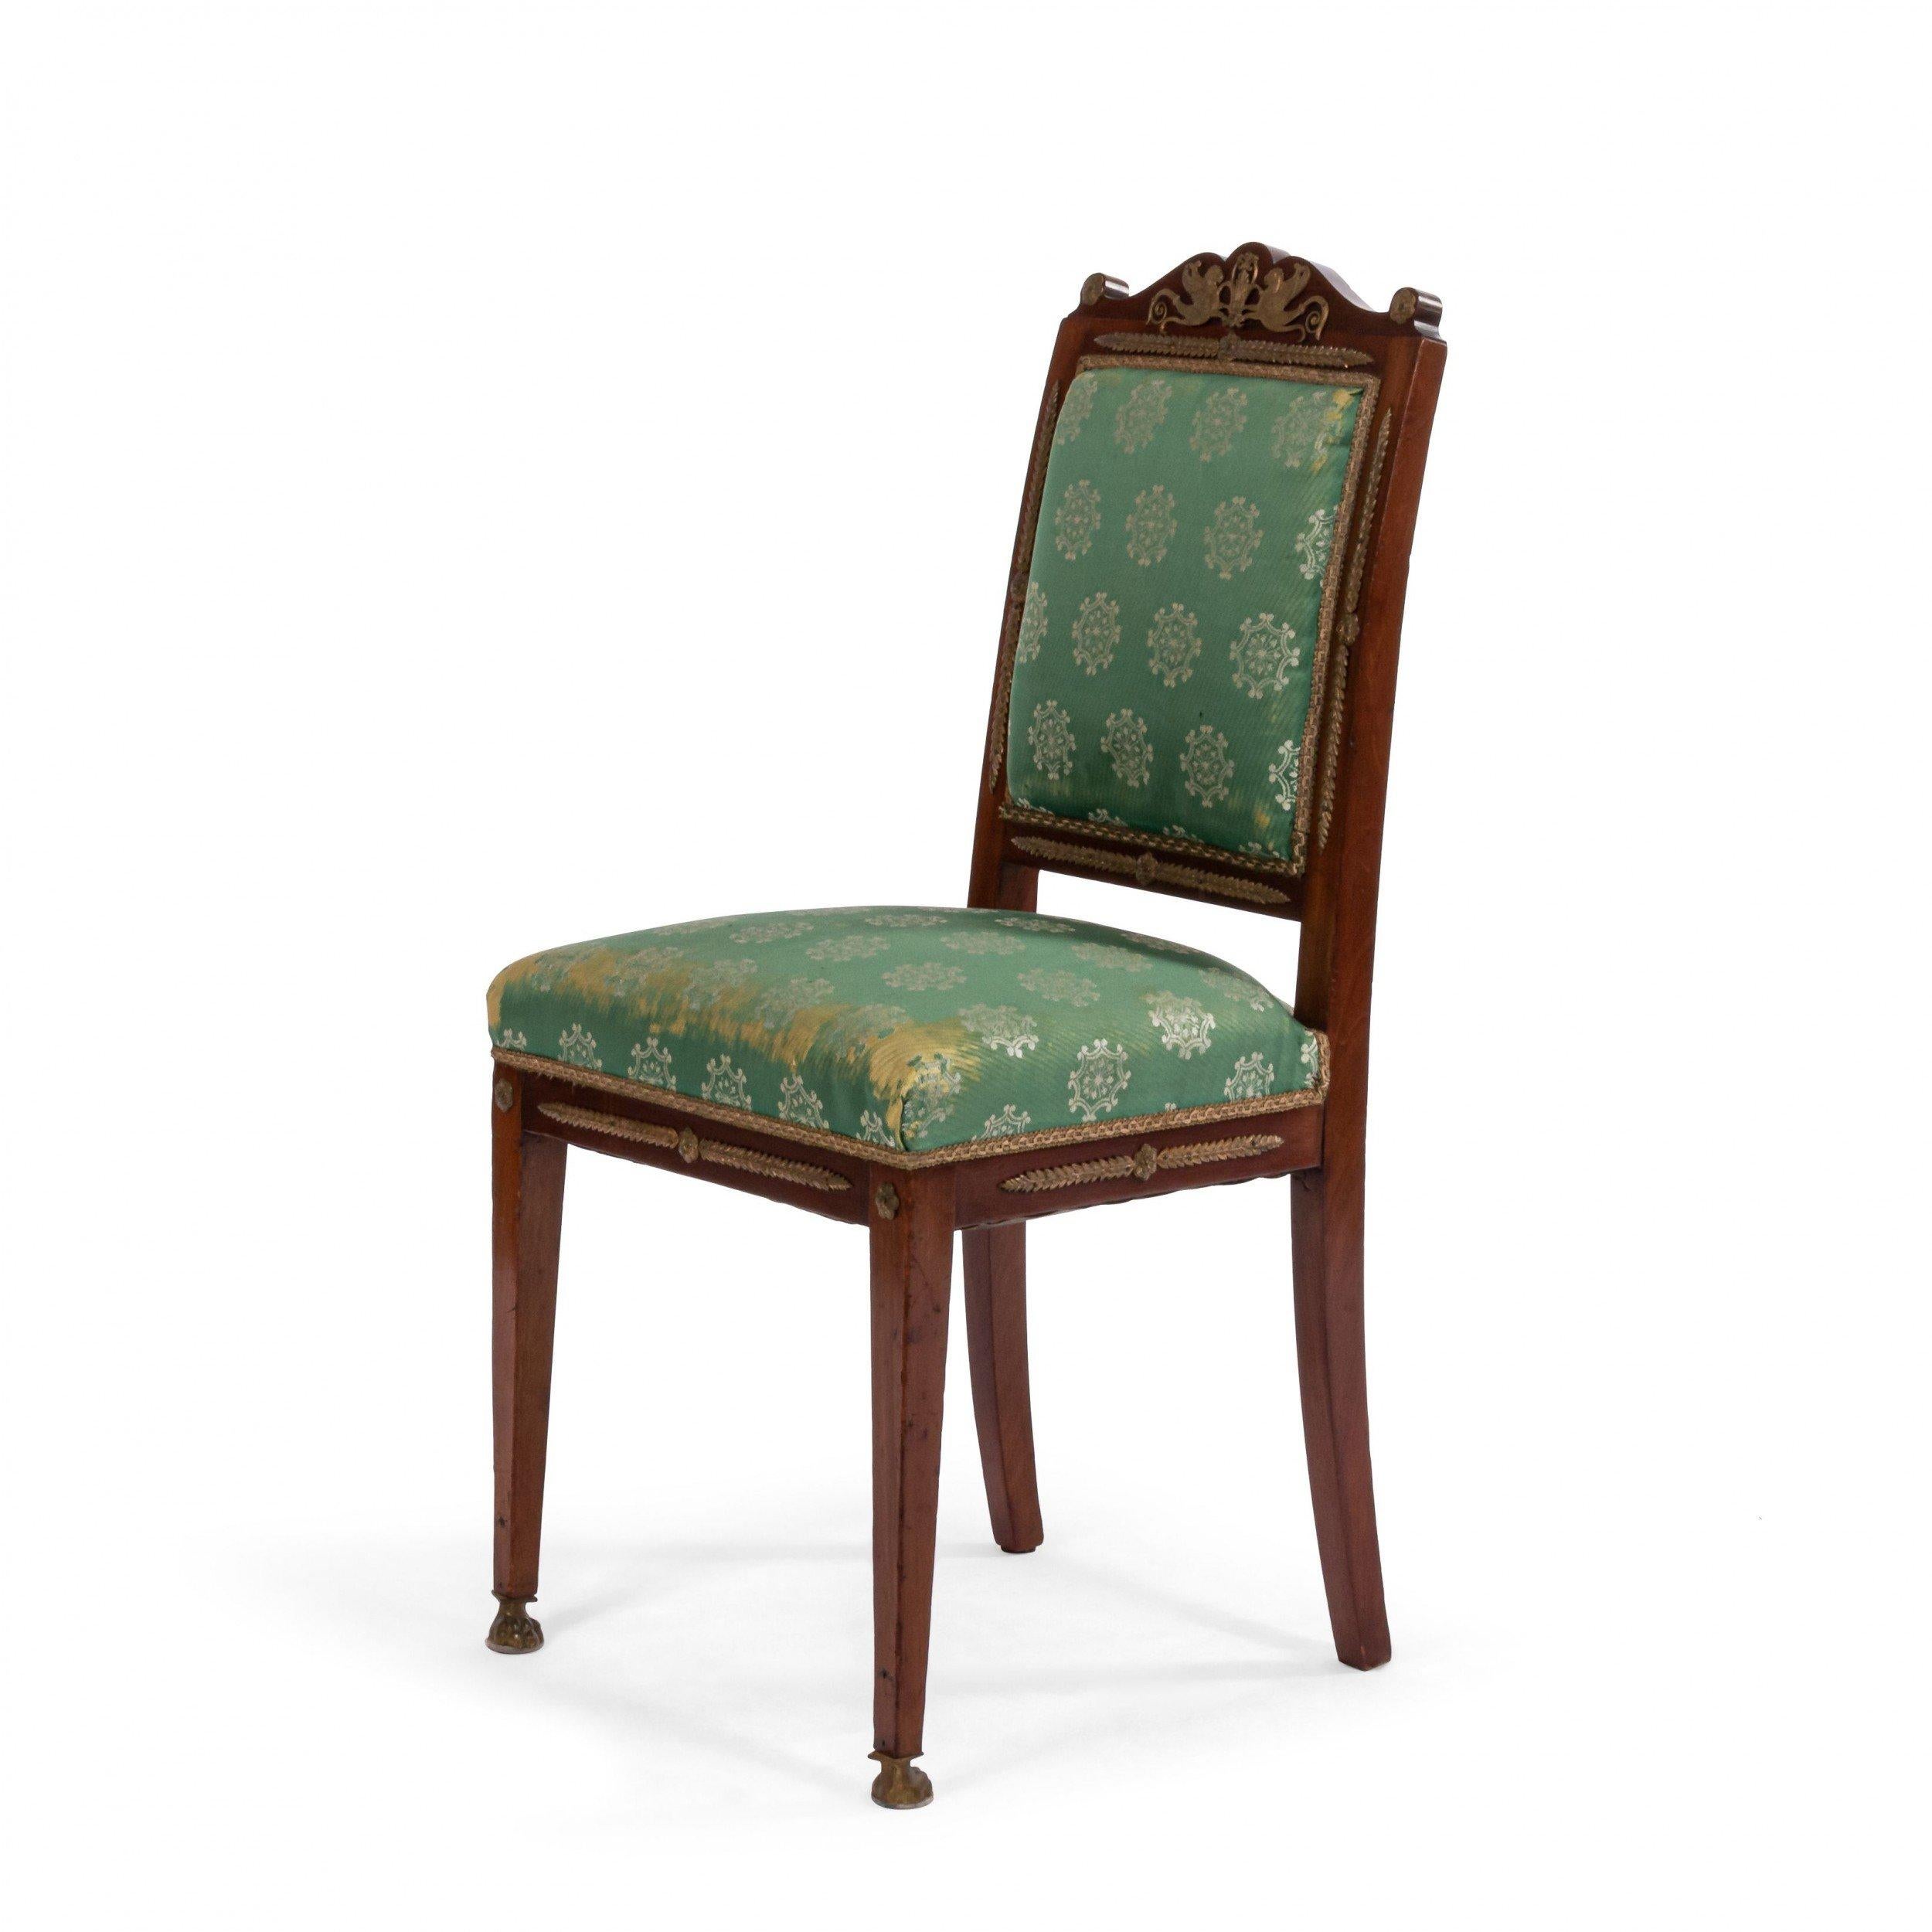 Set of 8 French Empire style (19th century) mahogany side chairs with bronze trim and green damask upholstery.